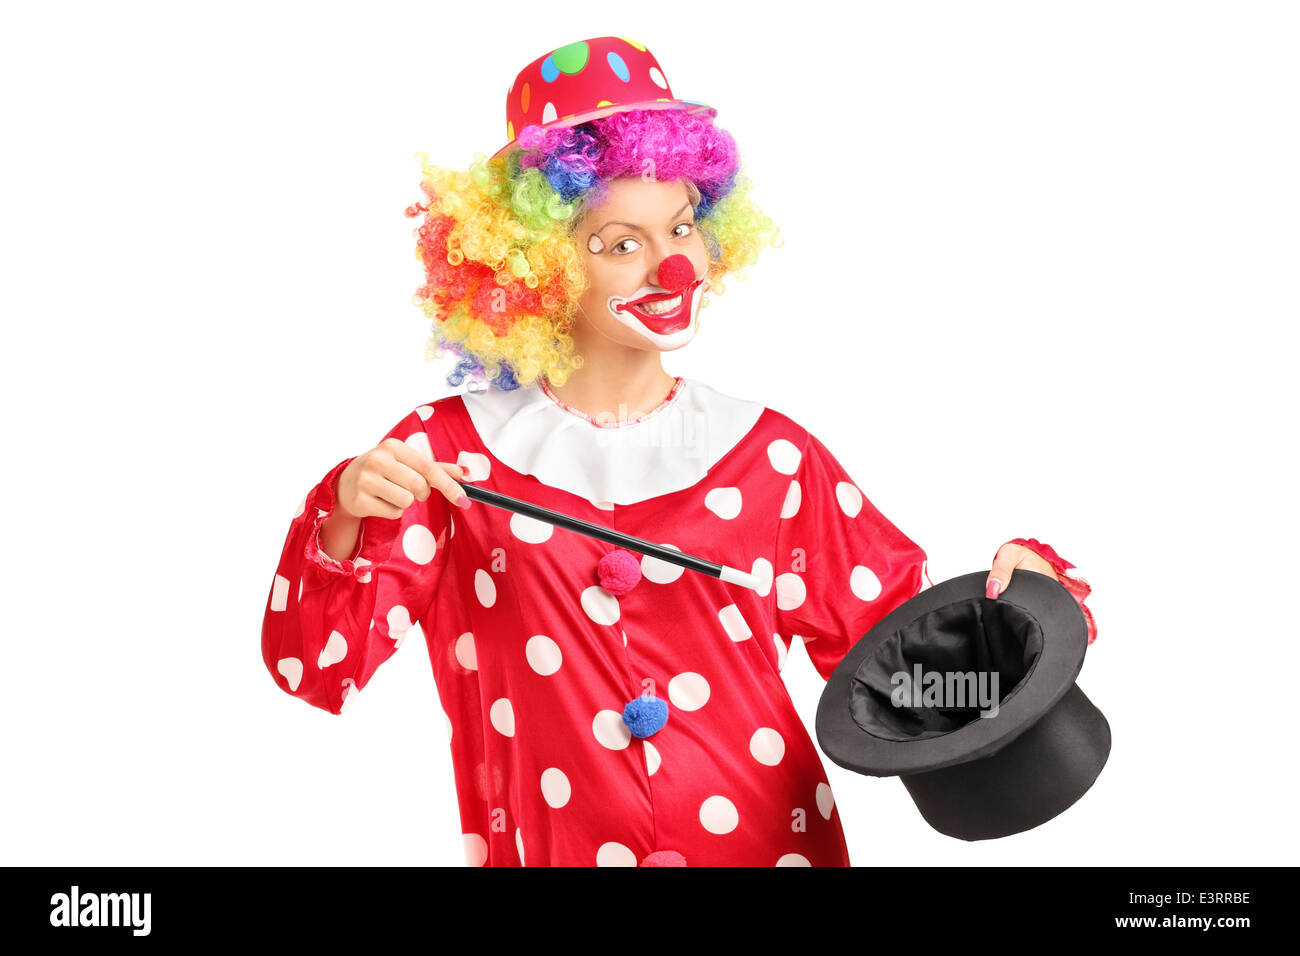 Female clown holding a magician hat Stock Photo